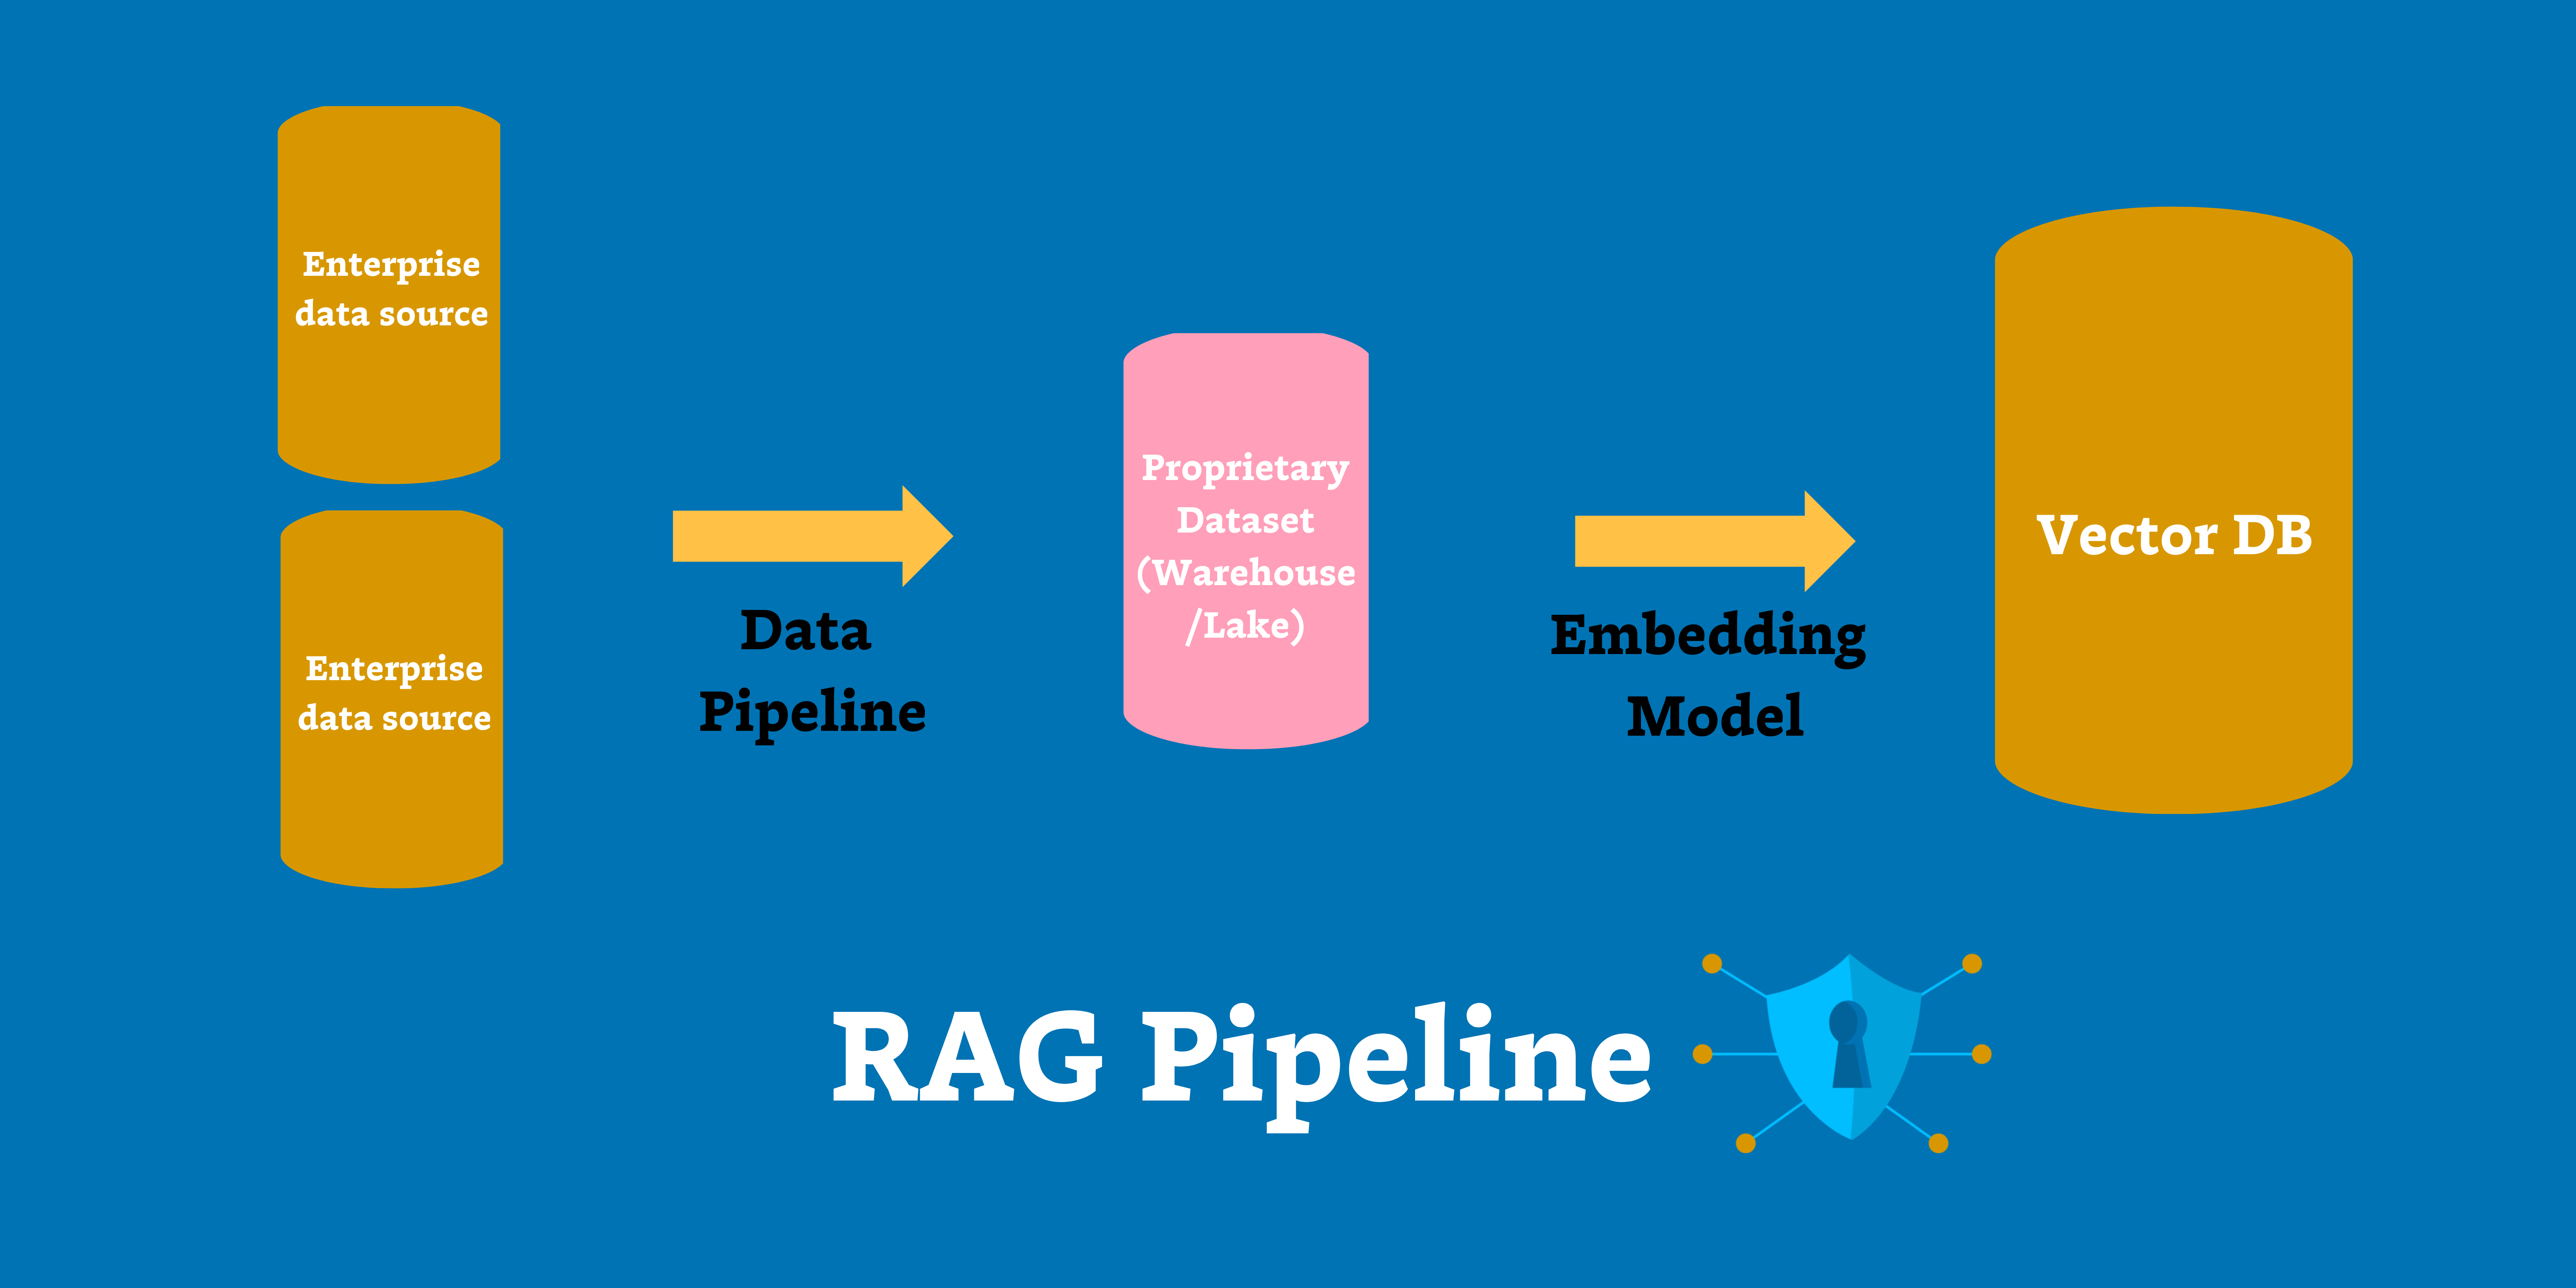 The Moat For Enterprise AI Is RAG + Fine Tuning - Here's Why